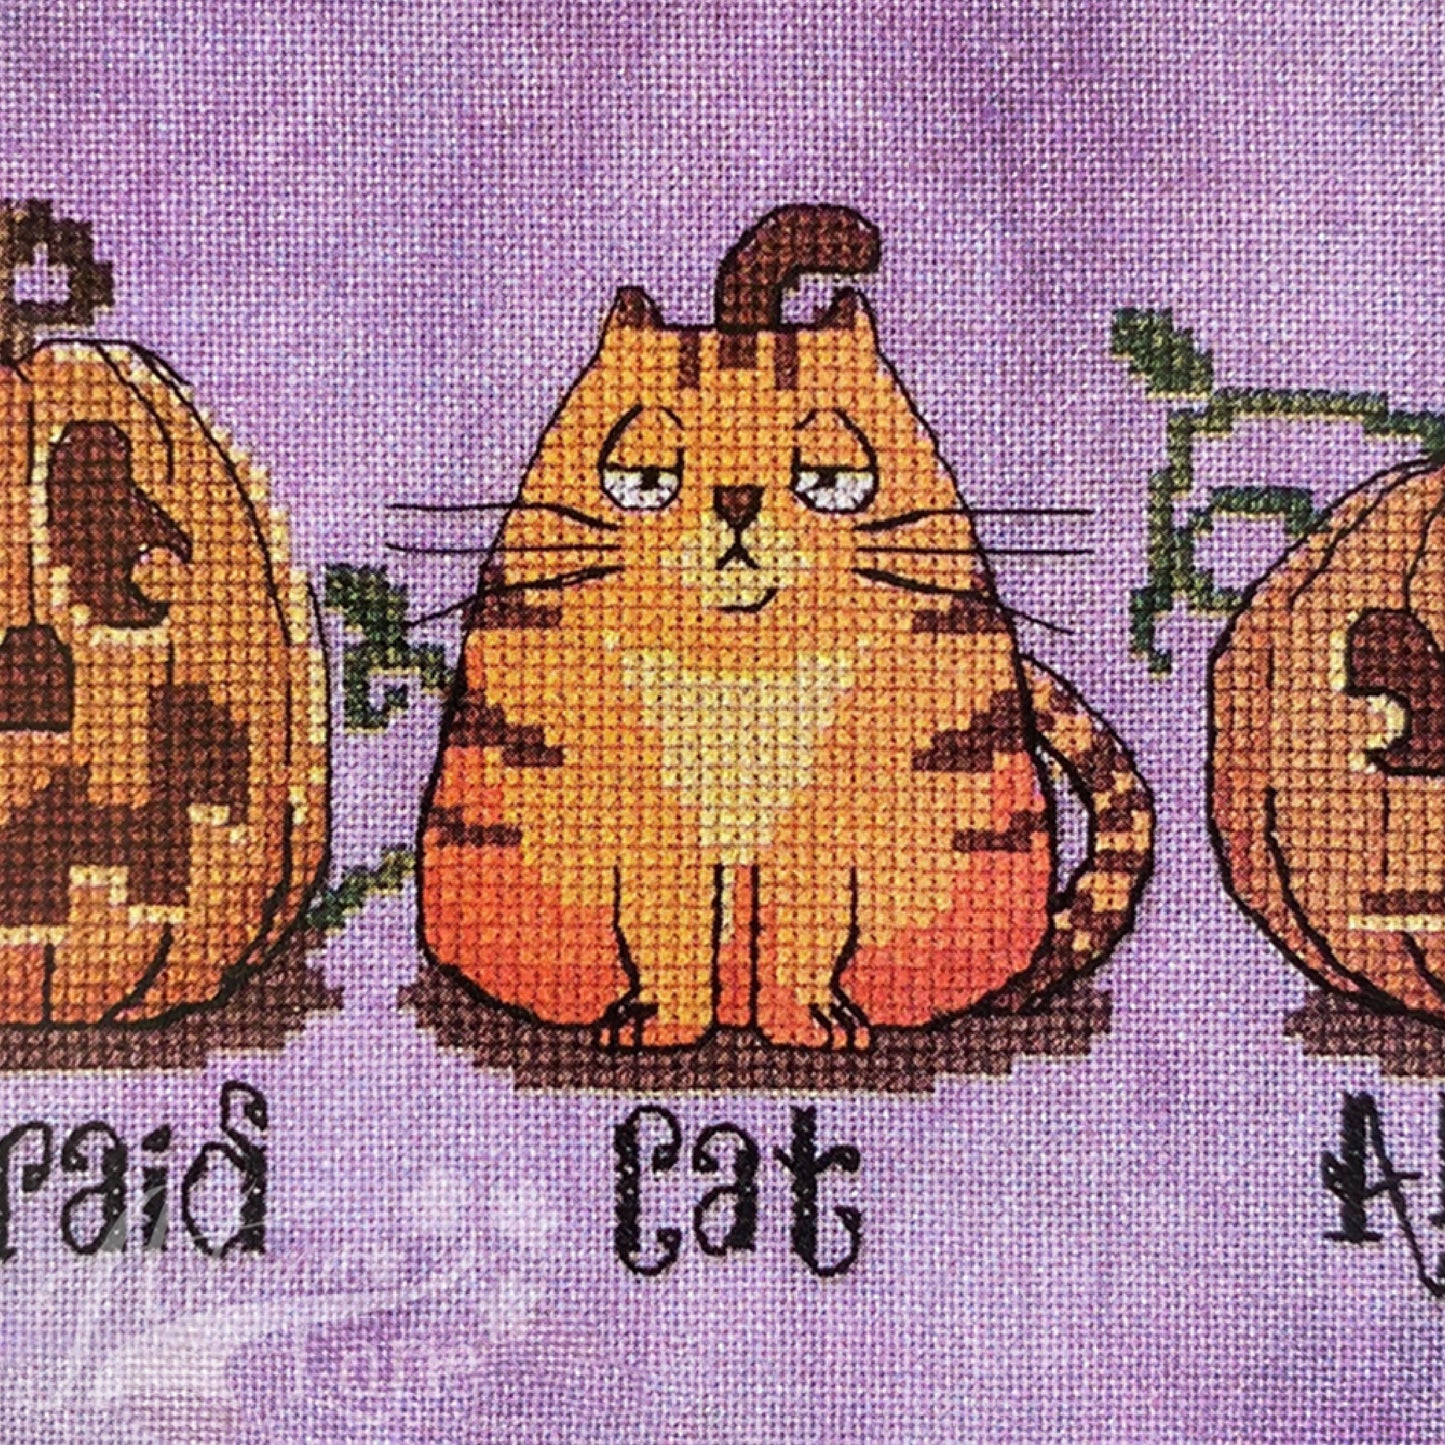 Pumpkins lined up. A cat is camouflaged as one of them.